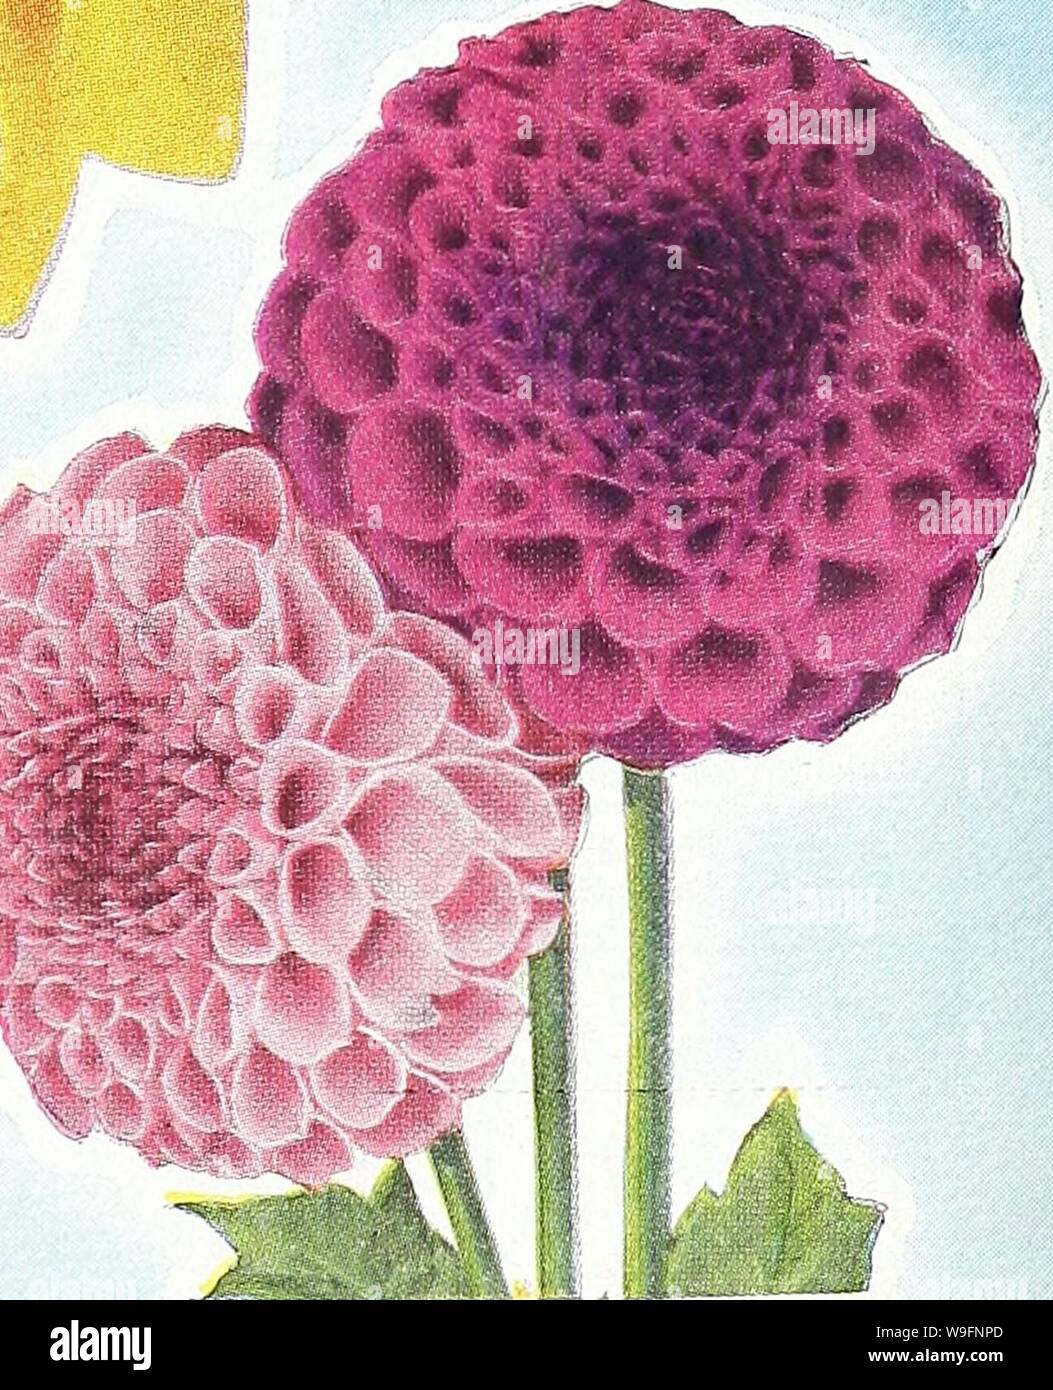 Archive image from page 58 of Currie's garden annual  1939. Currie's garden annual : 1939  curriesgardenann19curr 5 Year: 1939 ( DAHLIAS..nrize winning varieties r /'. &gt;--p .m- M / &gt;5 TUBEROSES One of the most fragrant of all flowers. Tall spikes of double waxy blooms—borne on tall stems. One of the loveliest flowering bulbs. Spear- shaped, gross-like foliage. Annual replacement frequently advisable. AURATUM LILY c--;-. x3l LILIES AURATUM. The gold-banded Lily of Japan. Flowers from 8 to 10 inches in diameter. White, chocolate crim- son spots, with a gold band on each petal. RUBRUM. A ha Stock Photo